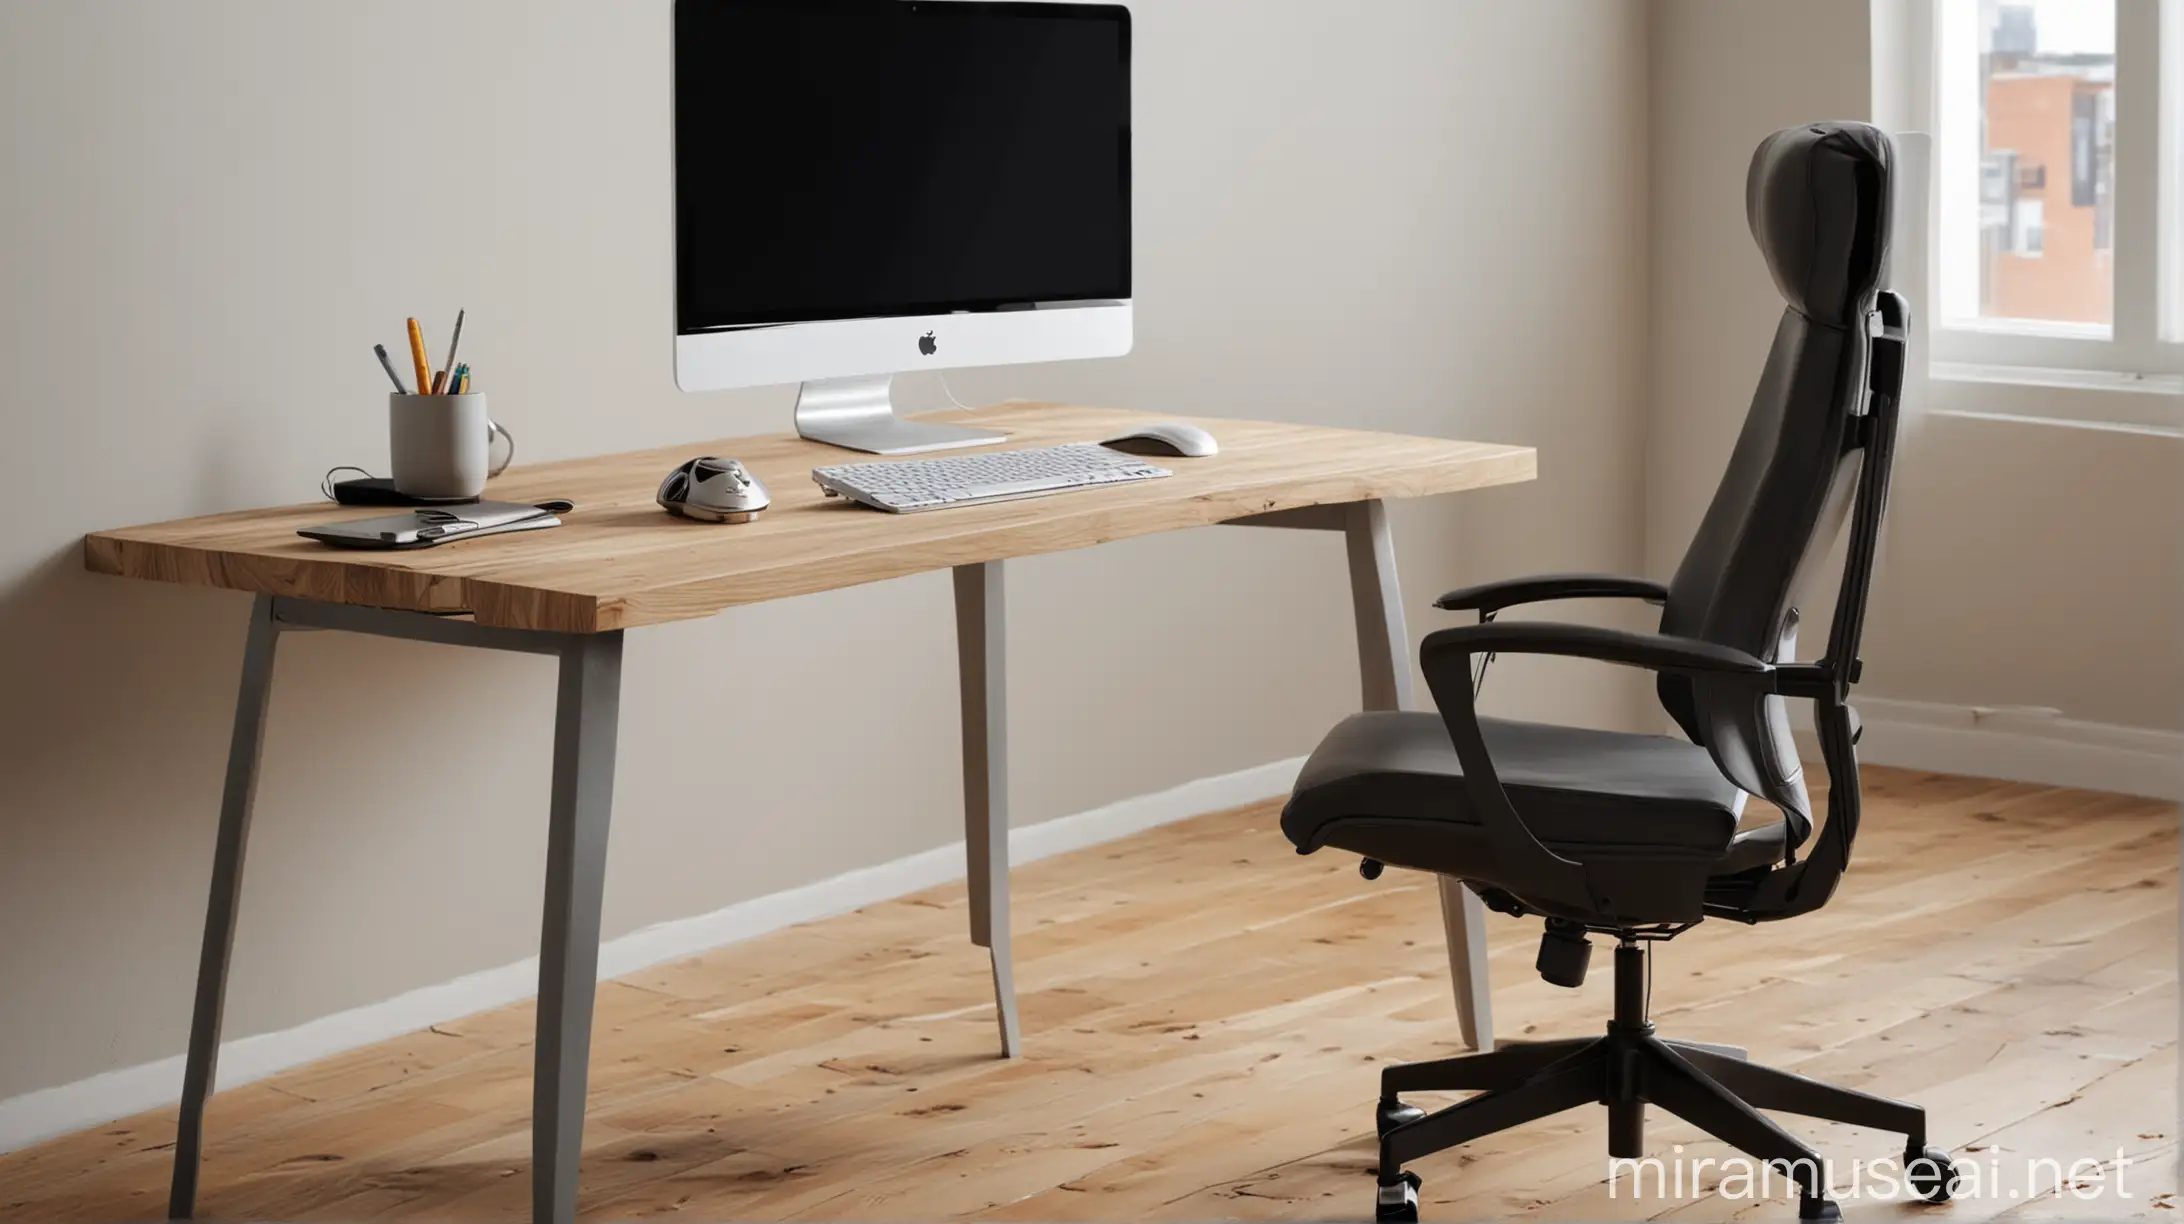 Modern Wooden Office Desk with Sleek Laptop and Office Chair in WellLit Room